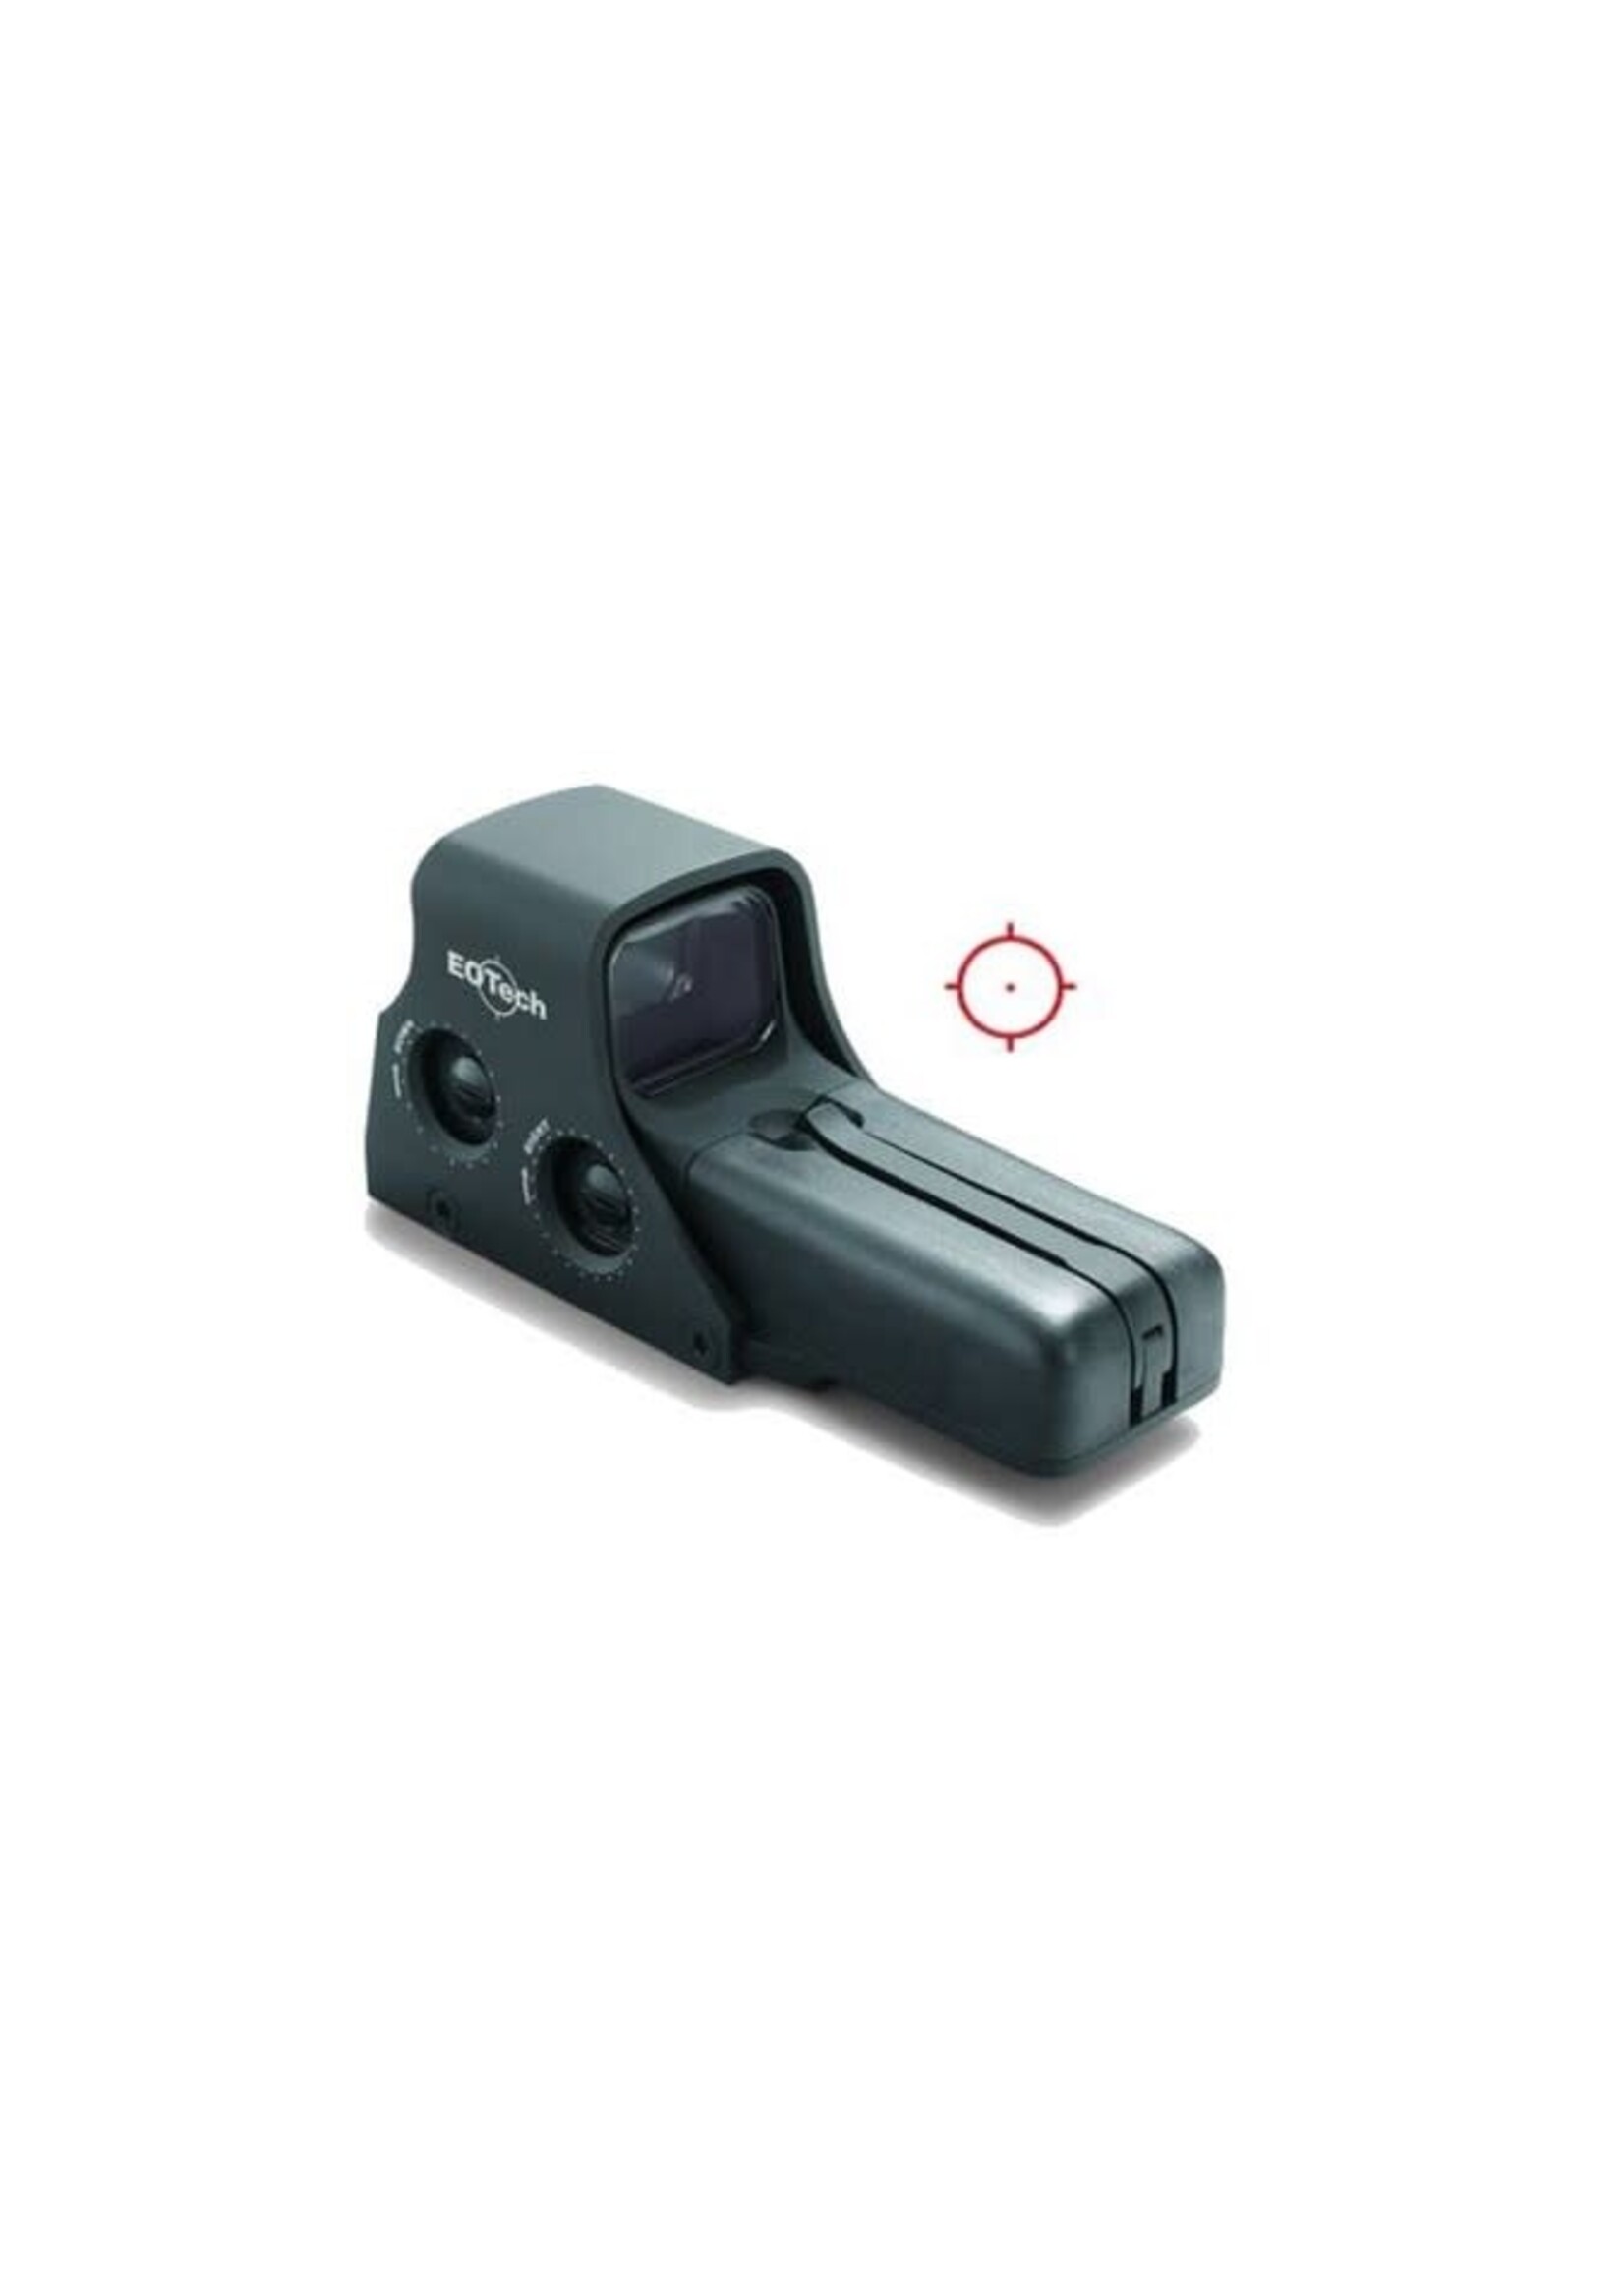 Eotech EOTech, 512 Holographic Sight, Red 68 MOA Ring with 1-MOA Dot Reticle, Rear Button Controls, Black Finish